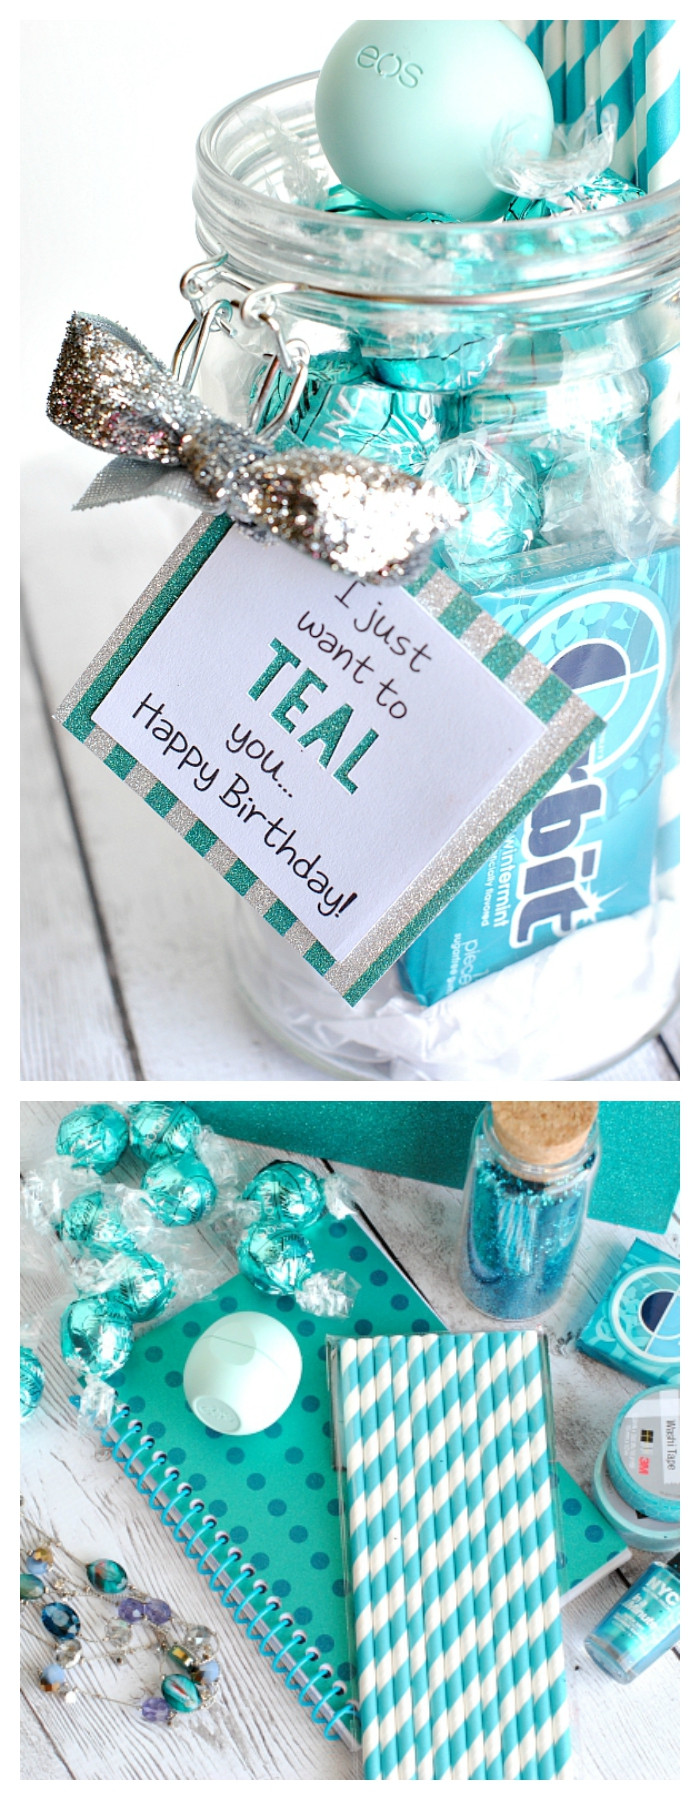 Cute Birthday Gifts For Friends
 I Just Want to TEAL You Gift Idea for Friend Crazy